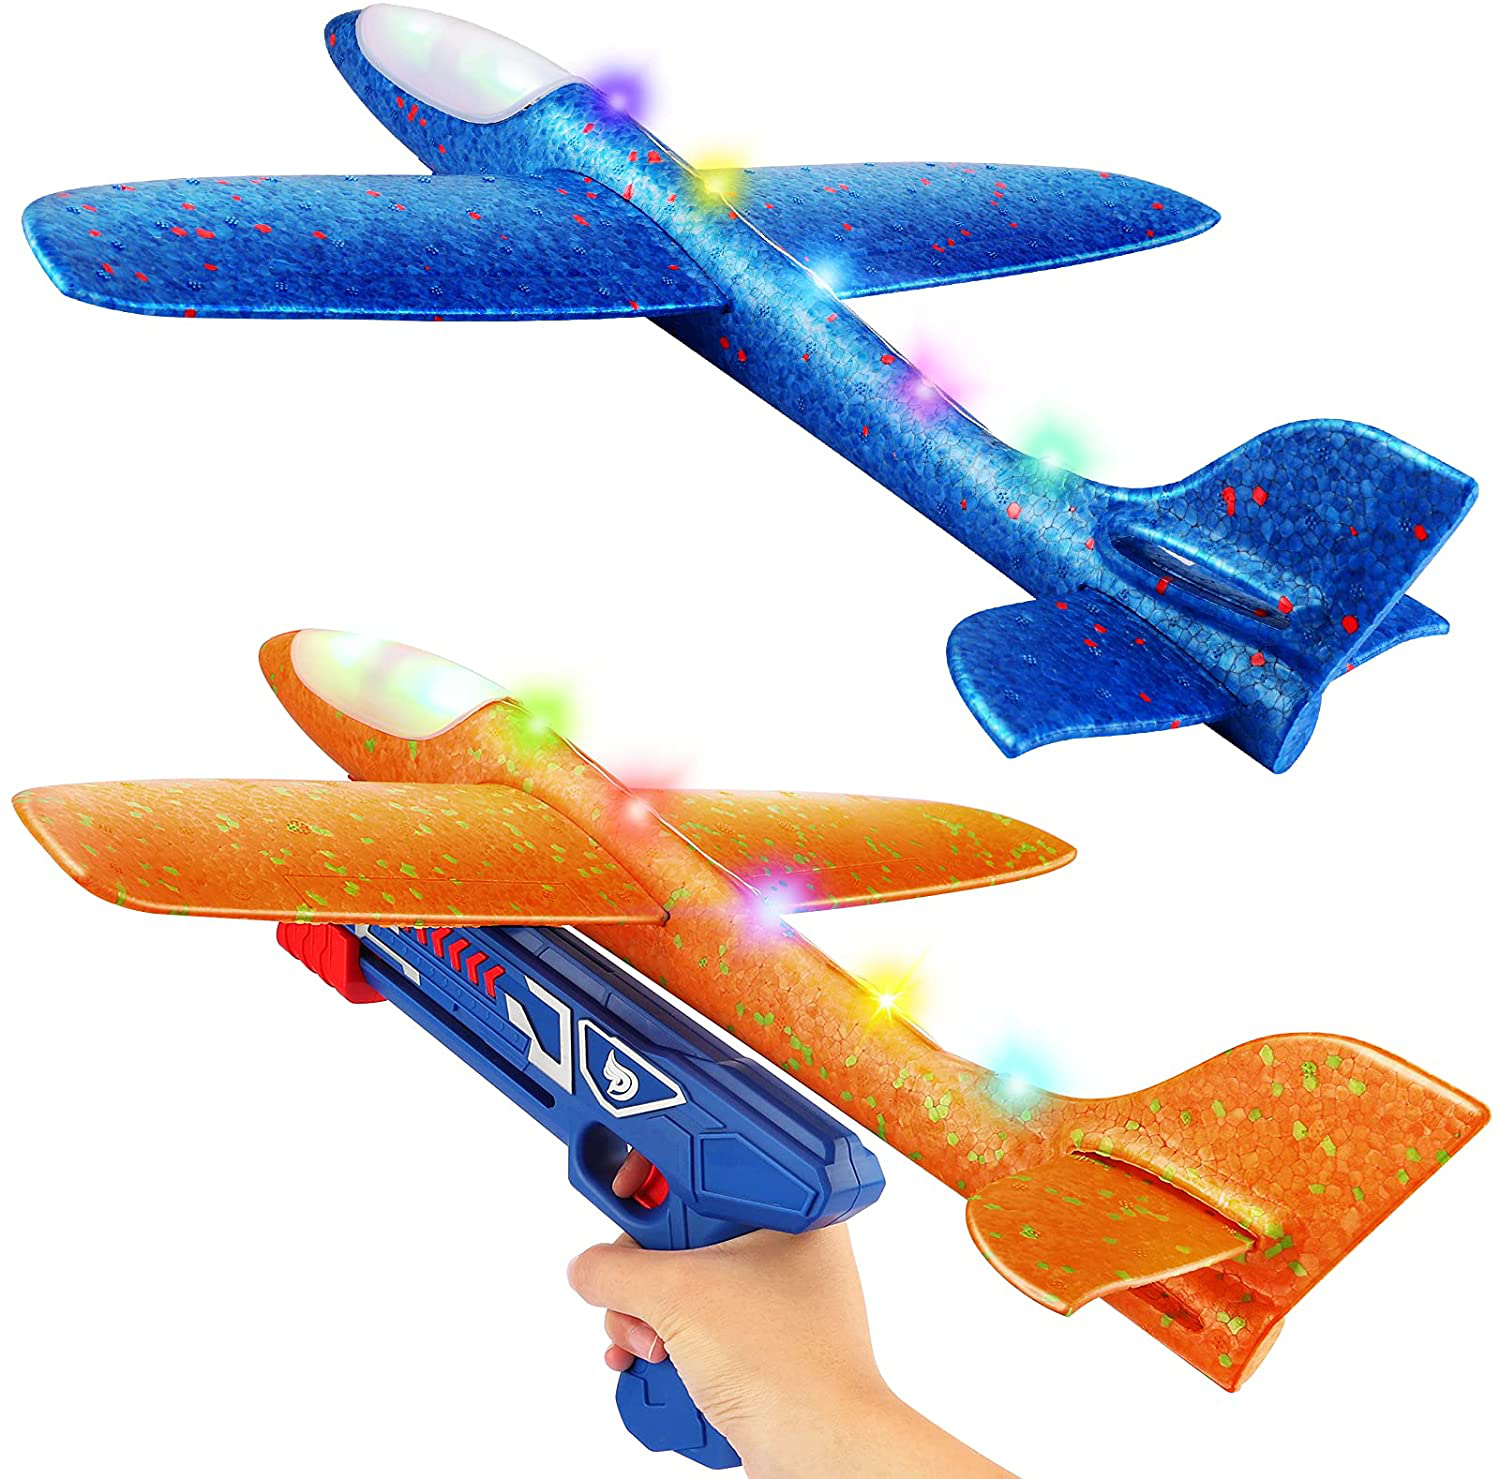 Rubber Band Elastic Powered Flying Glider Plane Airplane Model DIY Toy For Kids Useful and Practical 